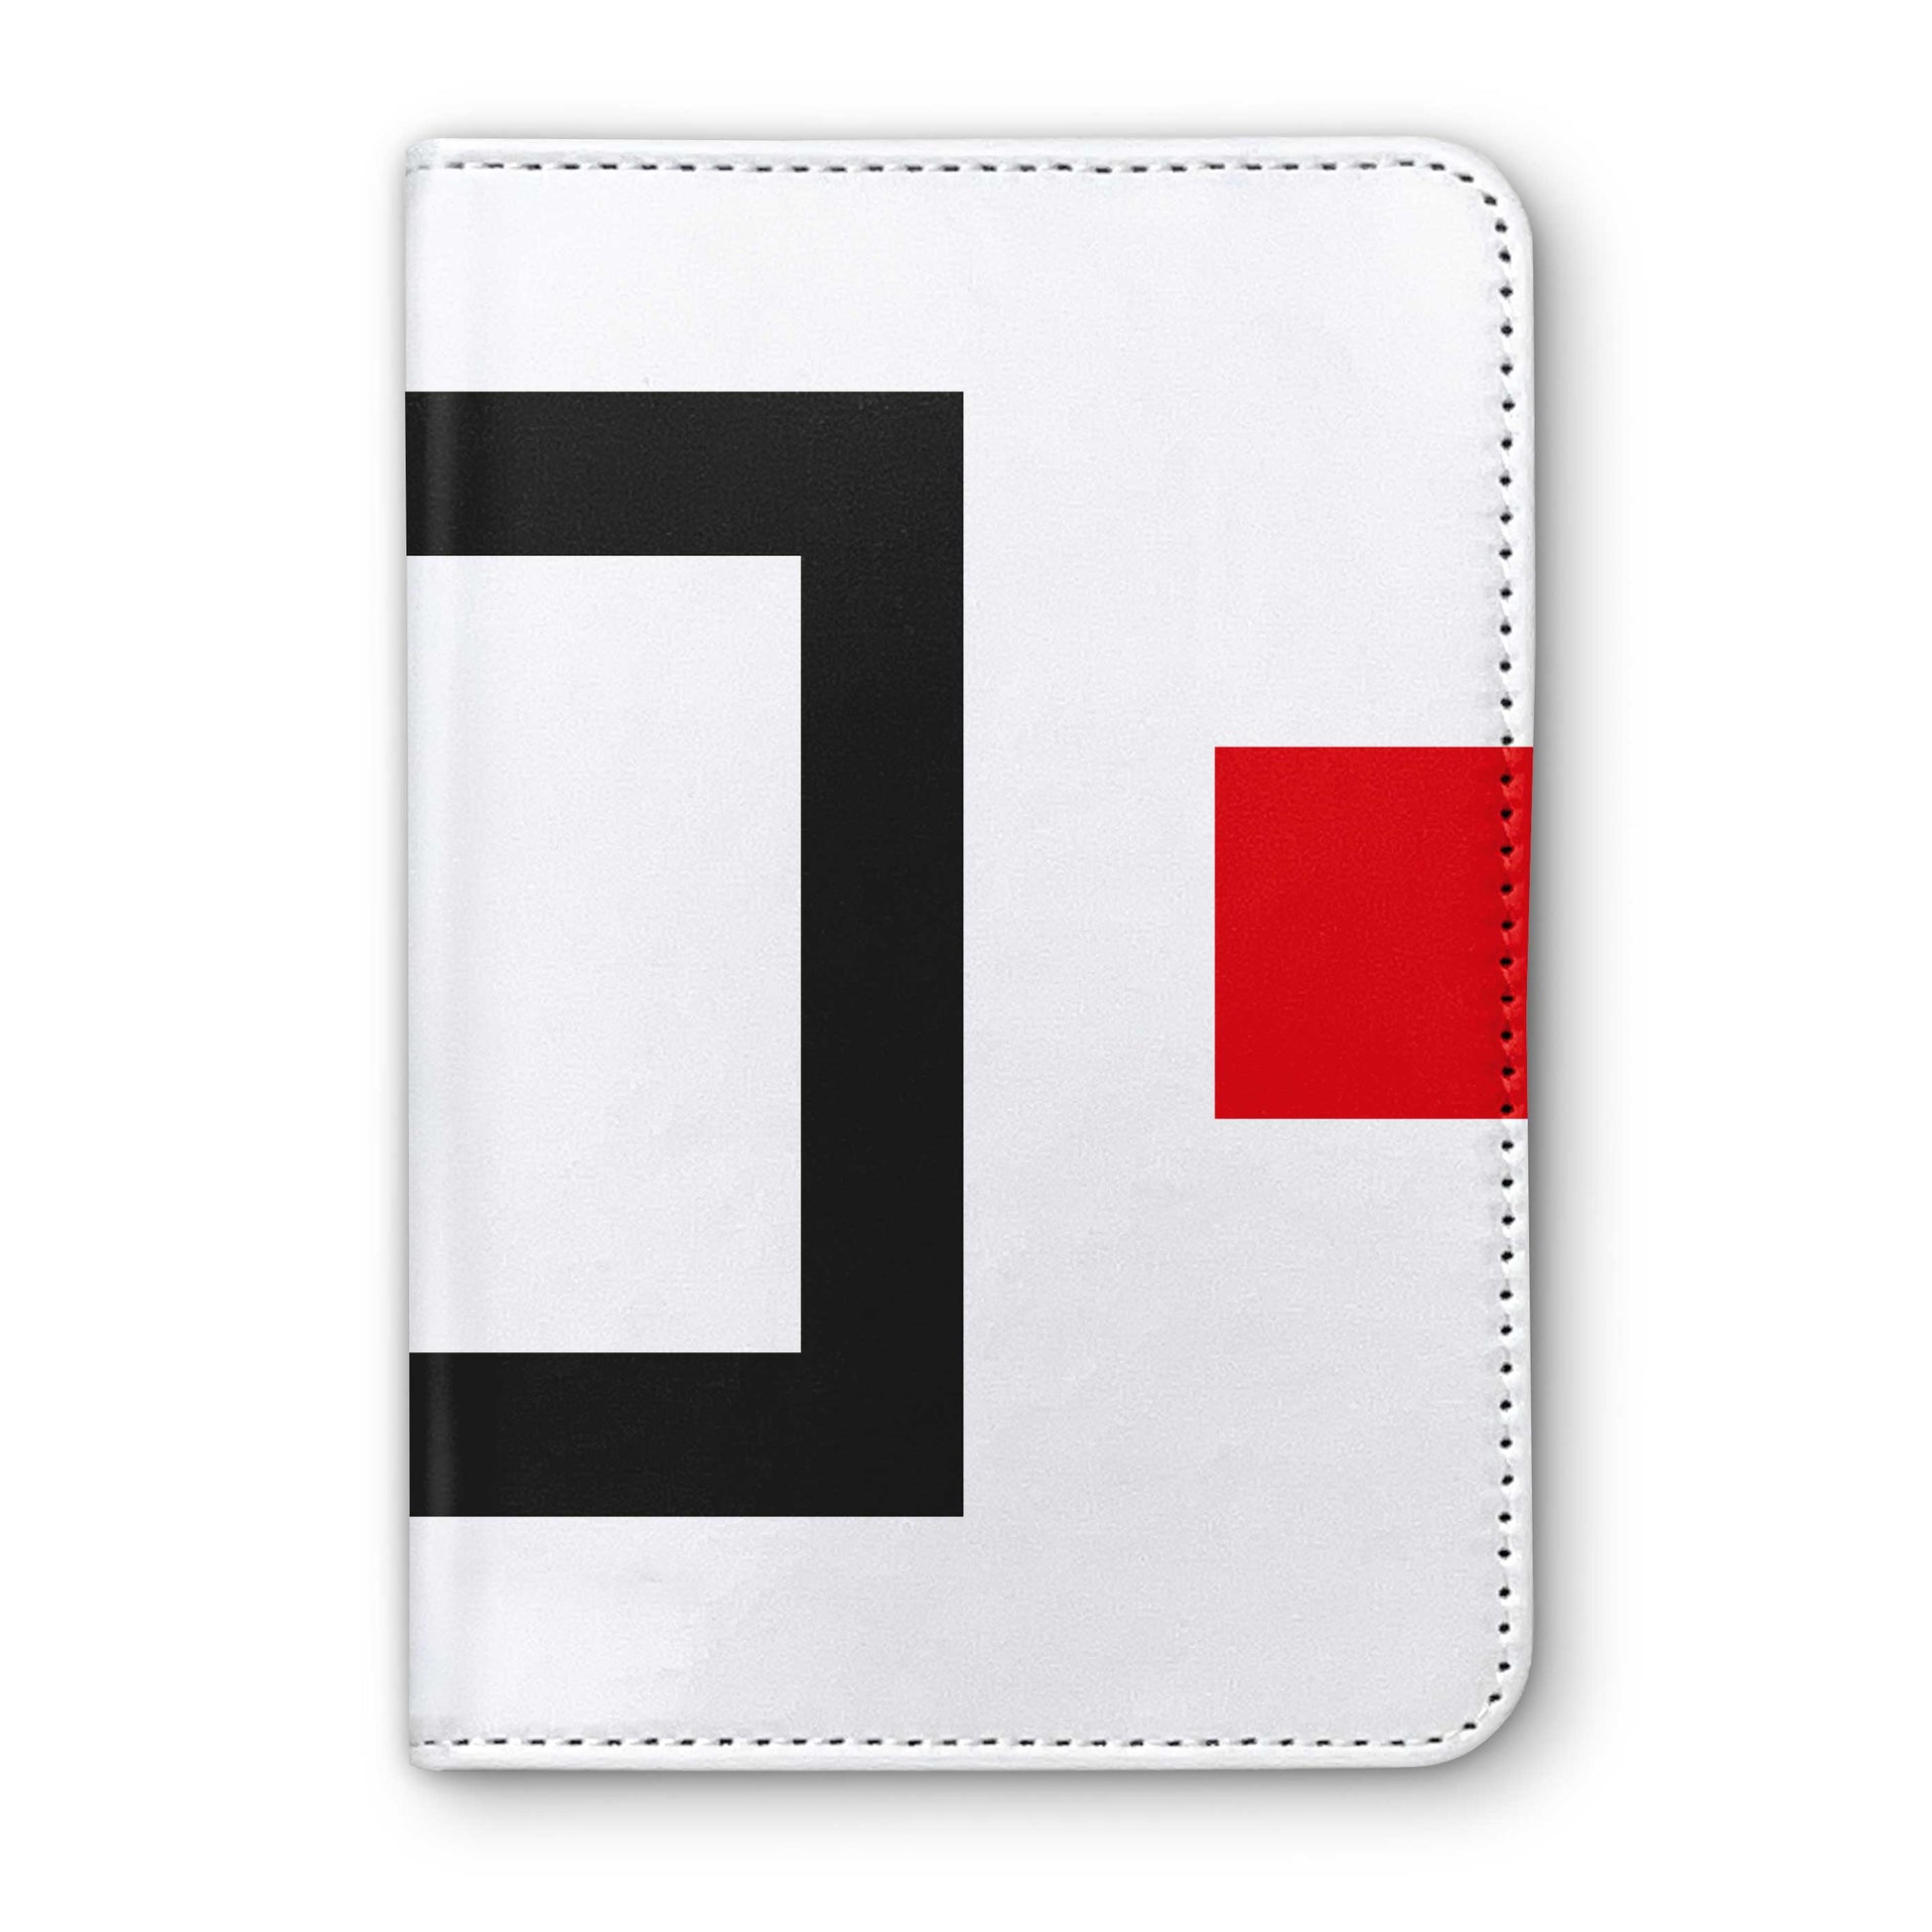 Some Neck Partnership Horse Racing Passport Holder - Hacked Up Horse Racing Gifts